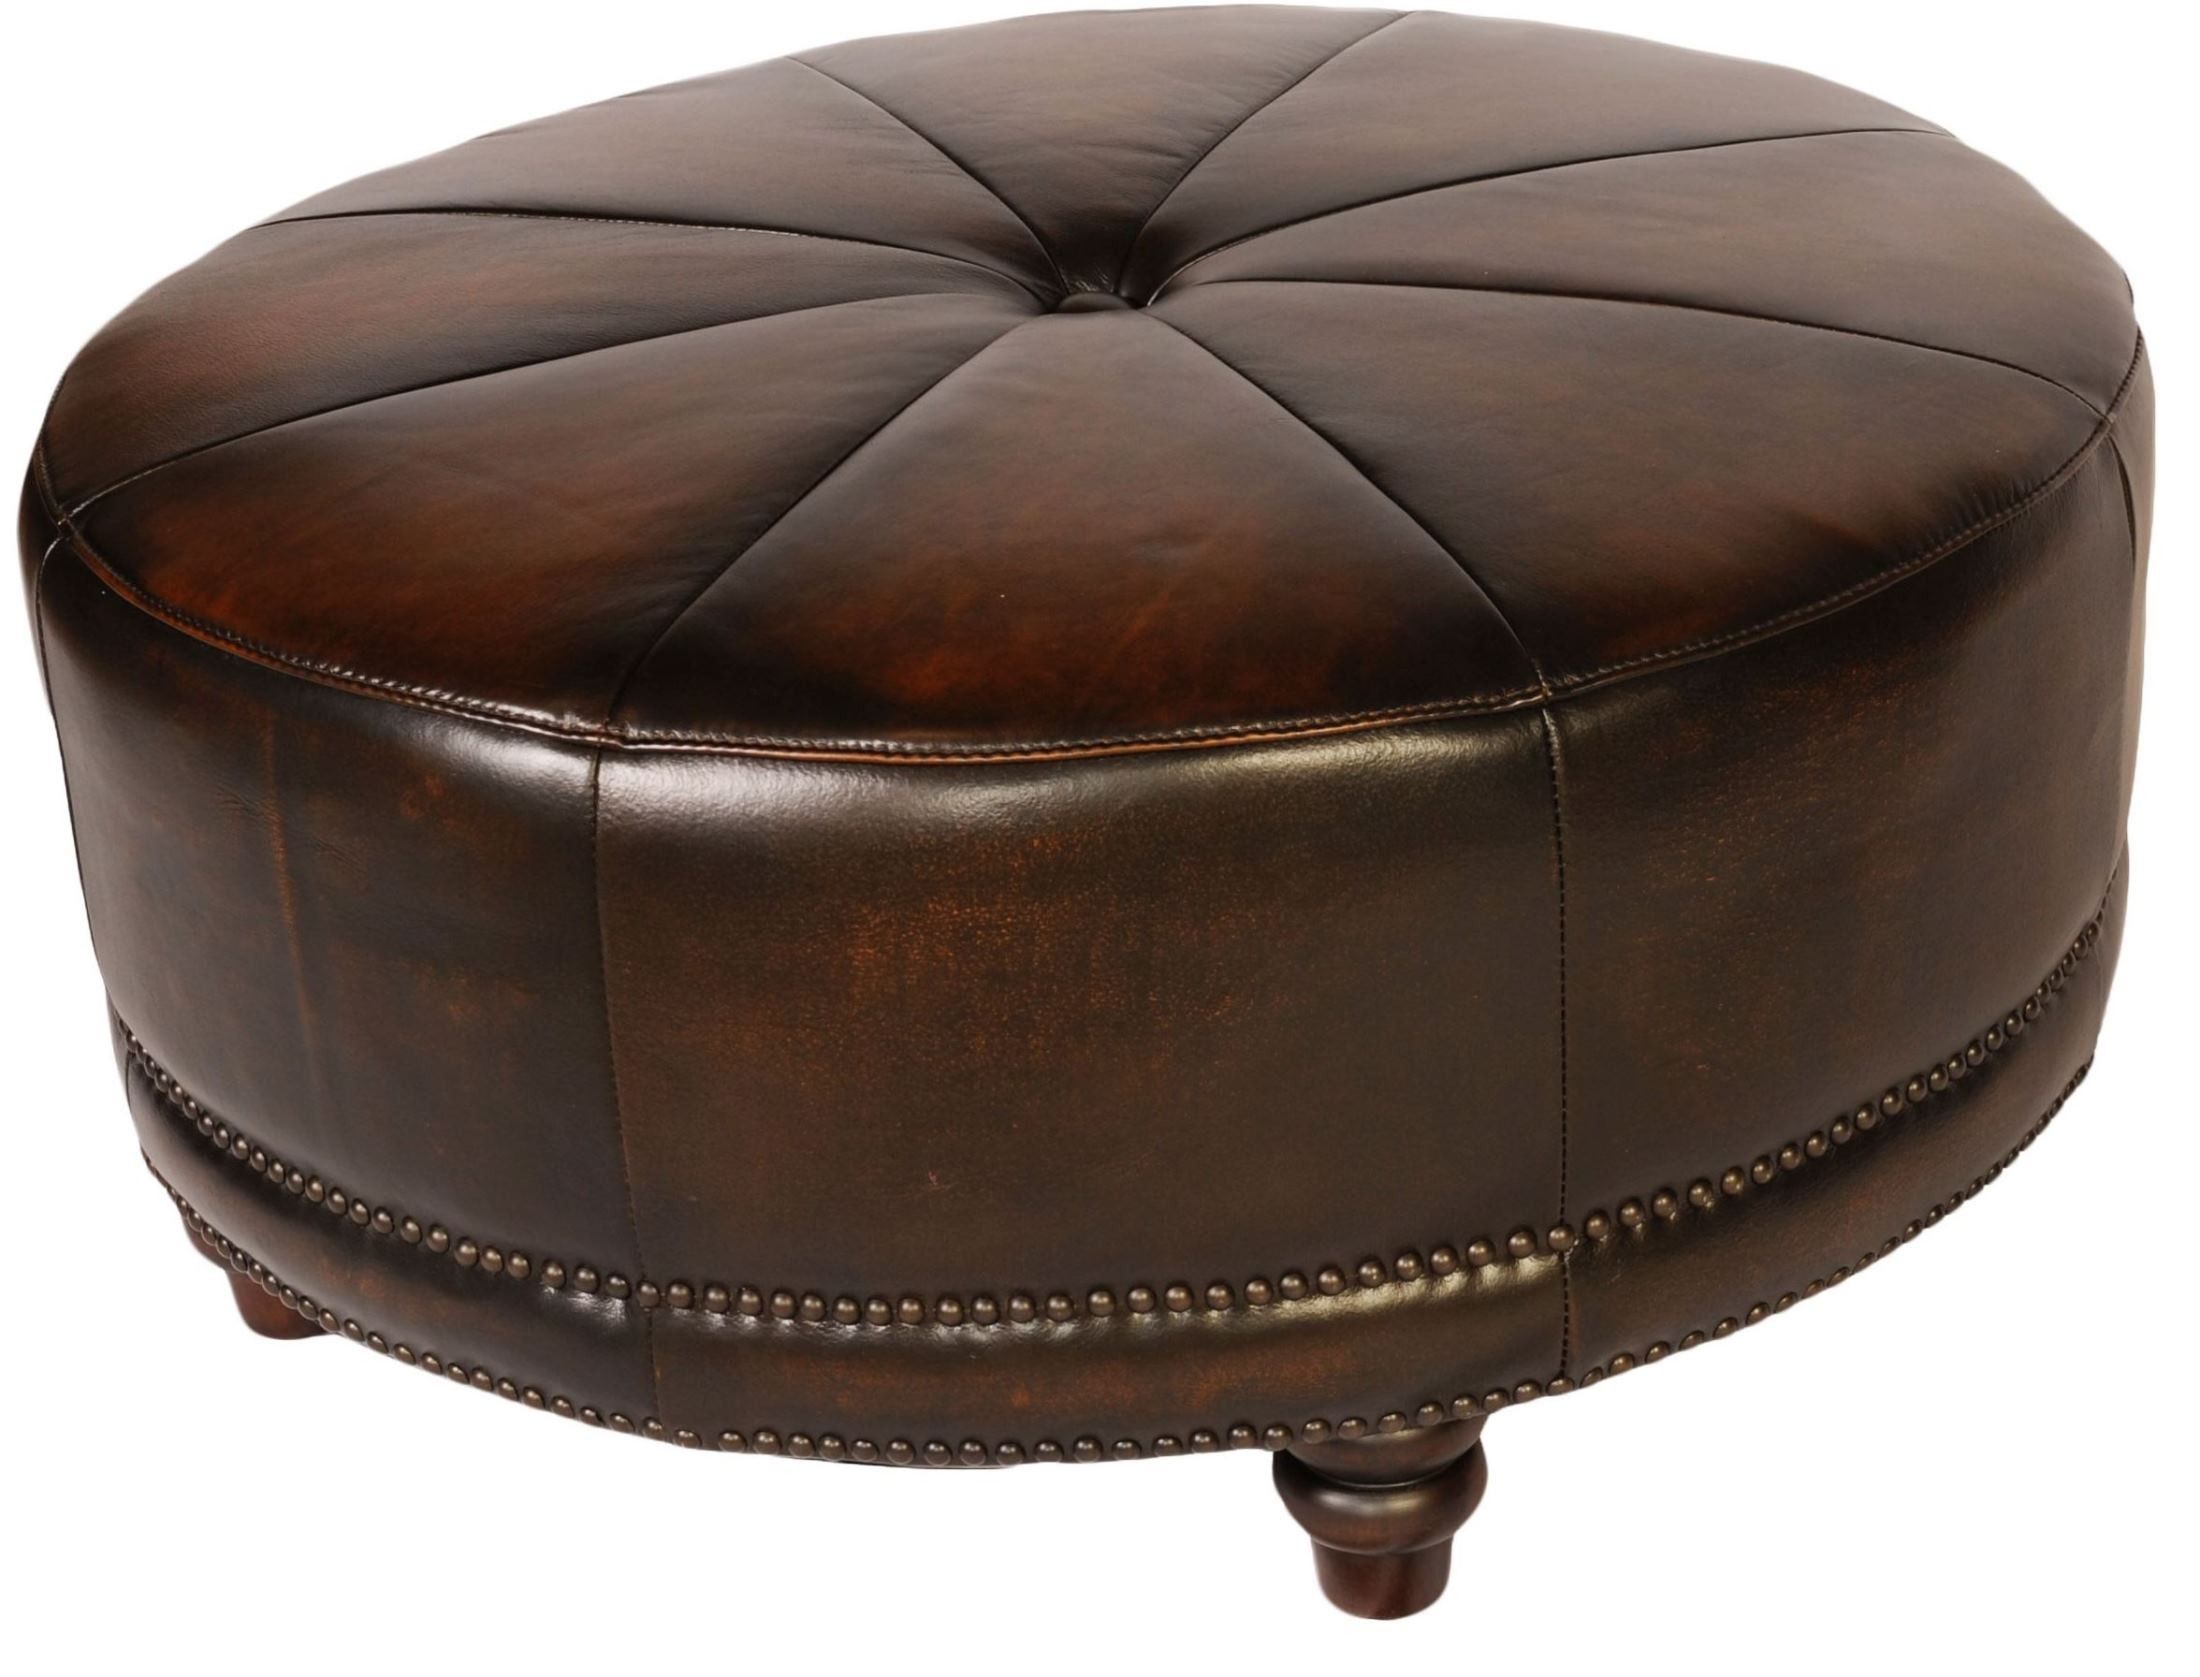 Cindy Black & Tan Leather Round Ottoman From Lazzaro (wh F371 3358b Within Dark Brown Leather Pouf Ottomans (View 13 of 20)